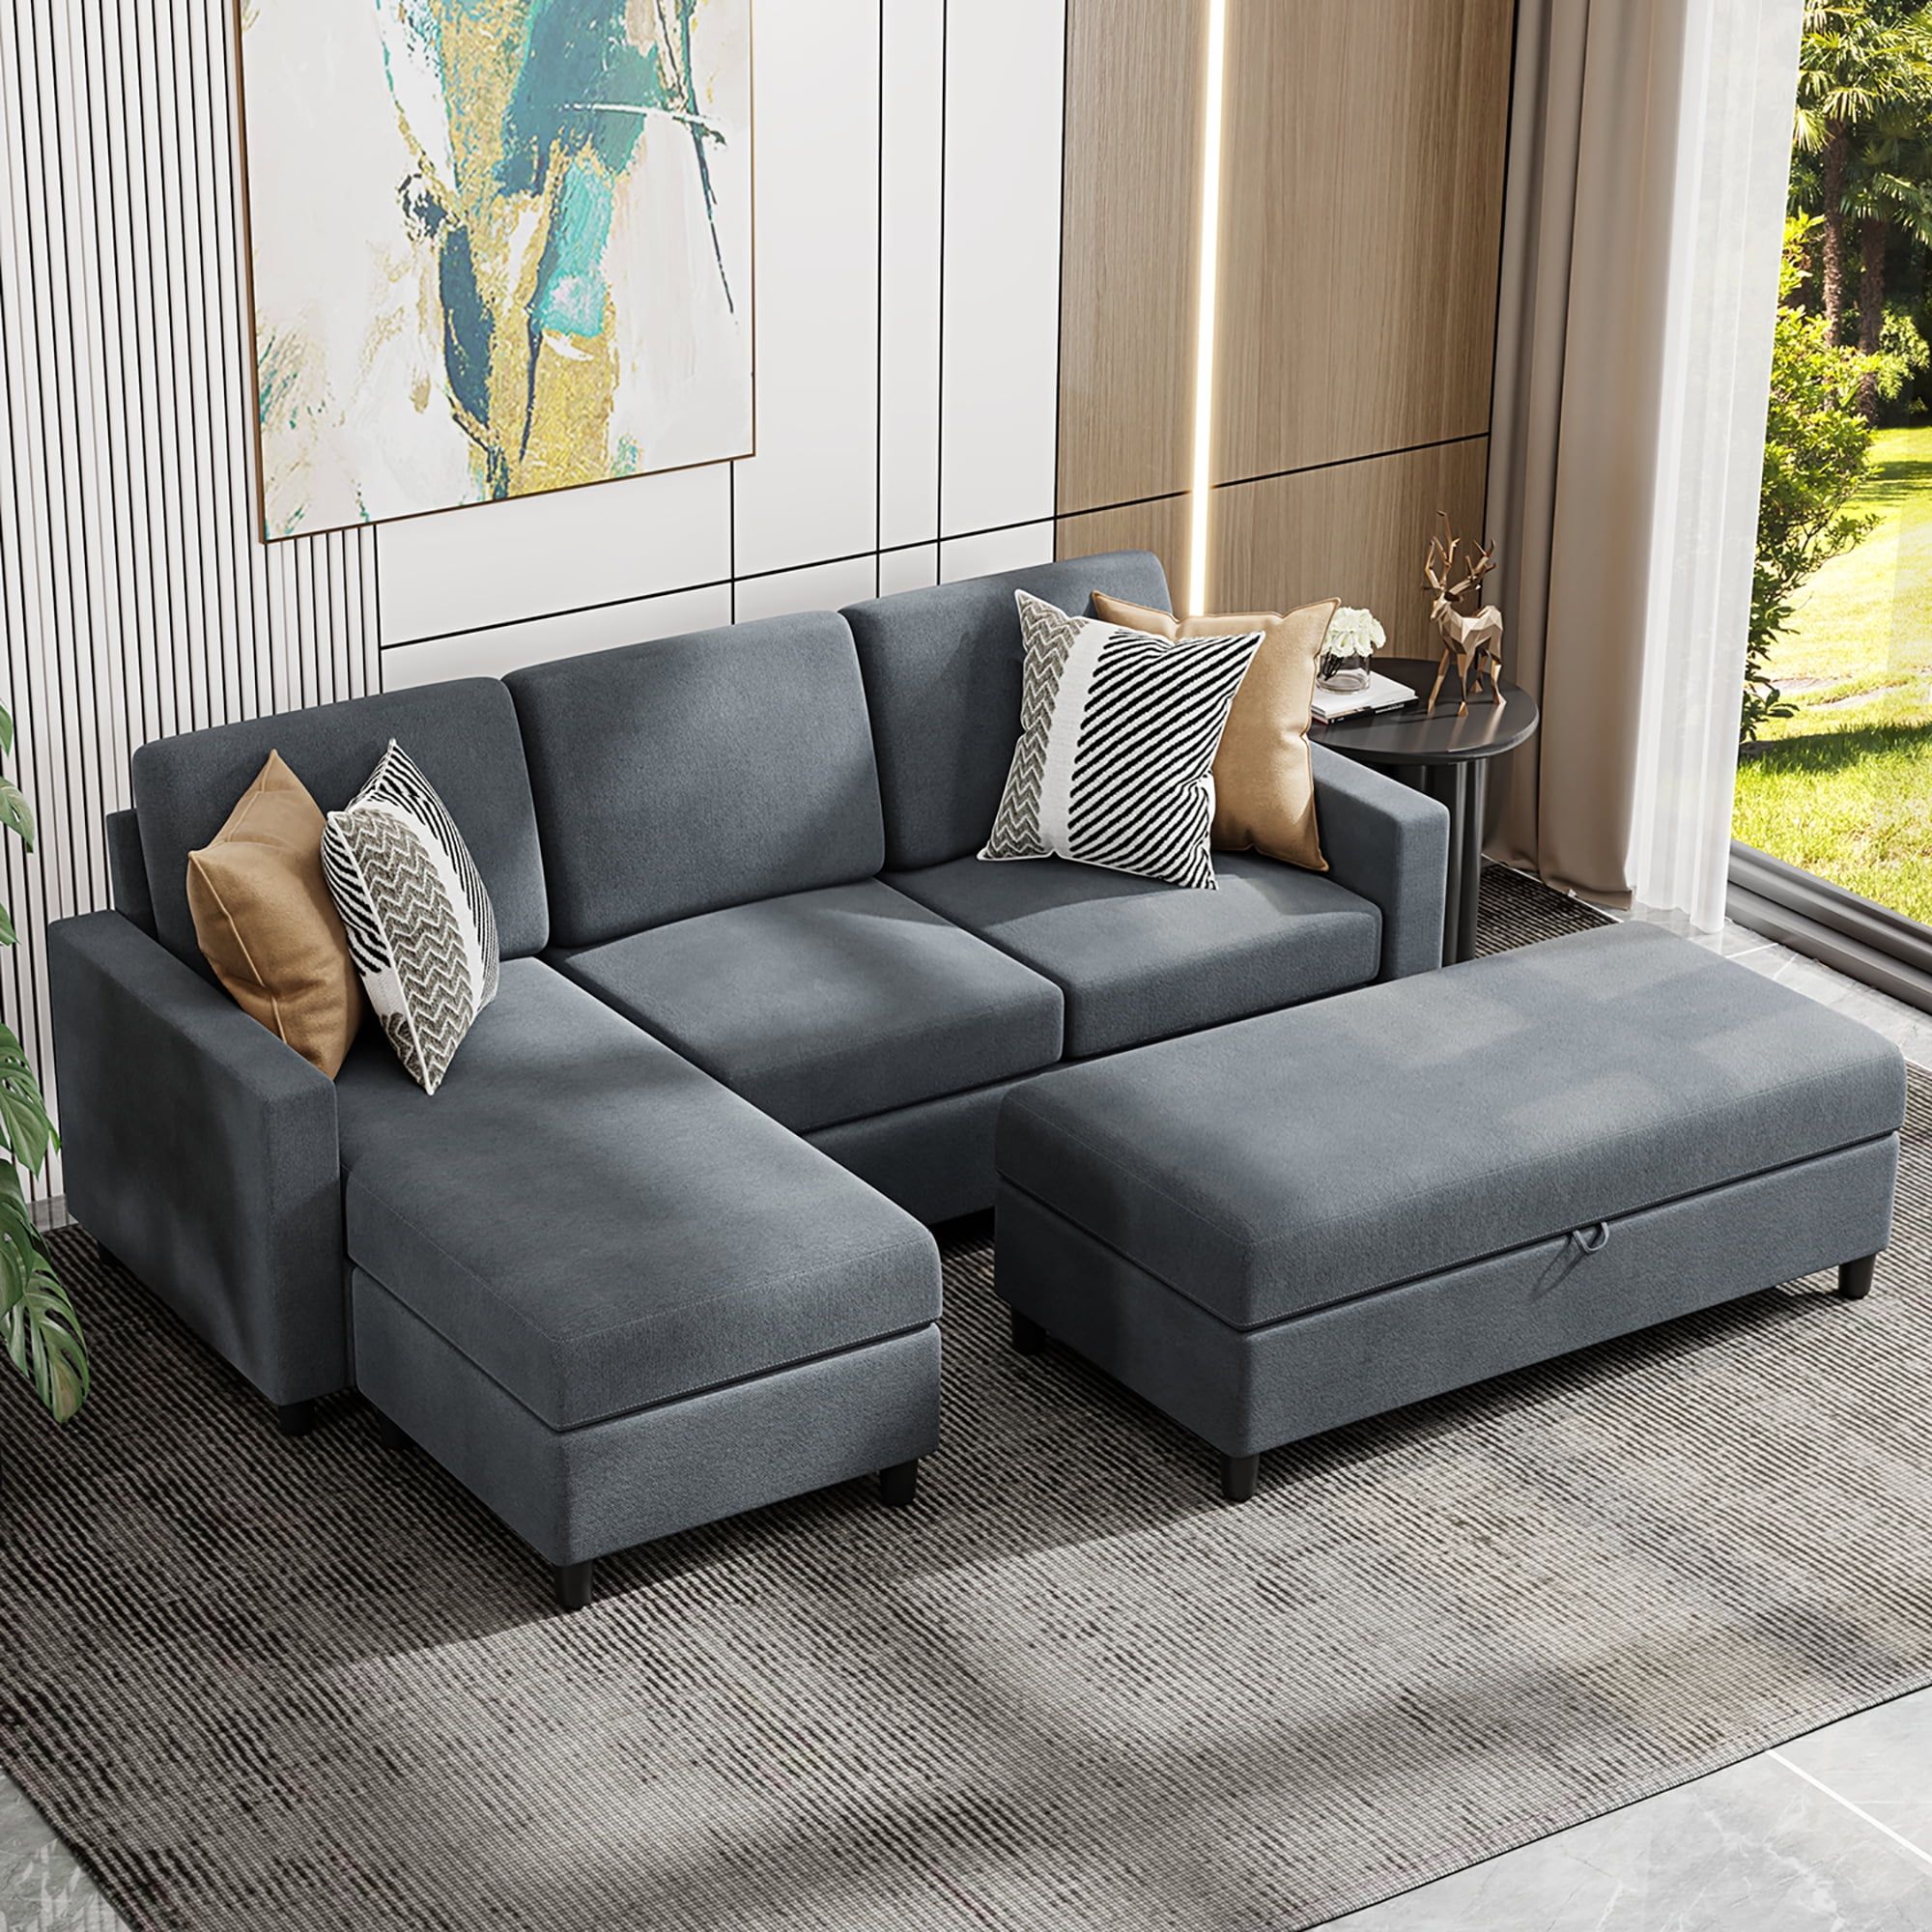 Convertible Sectional Sofa Couch With Storage Ottoman, L Shaped Wide  Reversible Chaise With Linen Fabric(charcoal Grey) – Walmart In Convertible L Shaped Sectional Sofas (Photo 2 of 15)